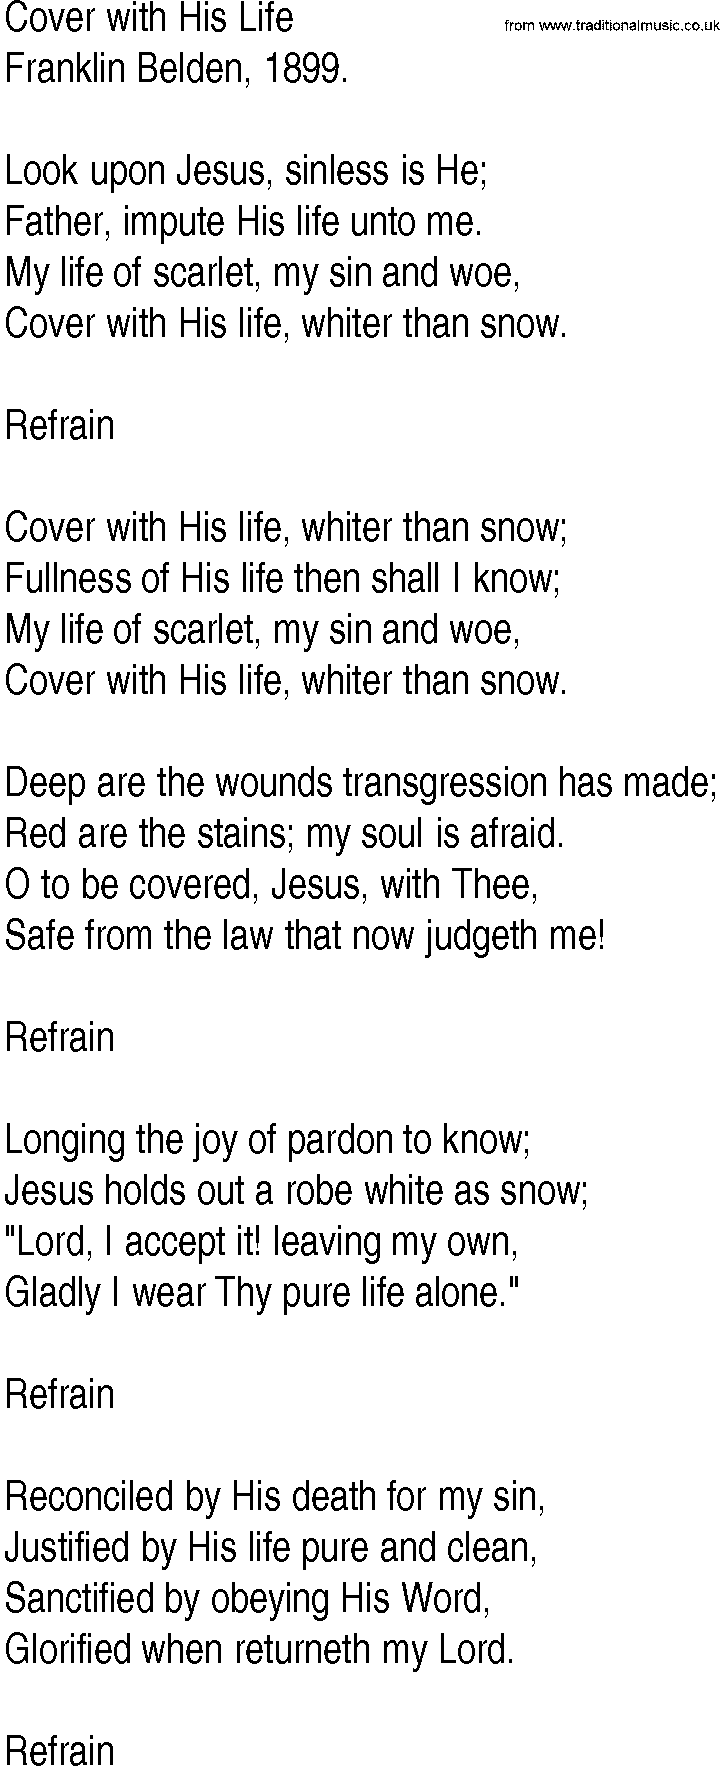 Hymn and Gospel Song: Cover with His Life by Franklin Belden lyrics